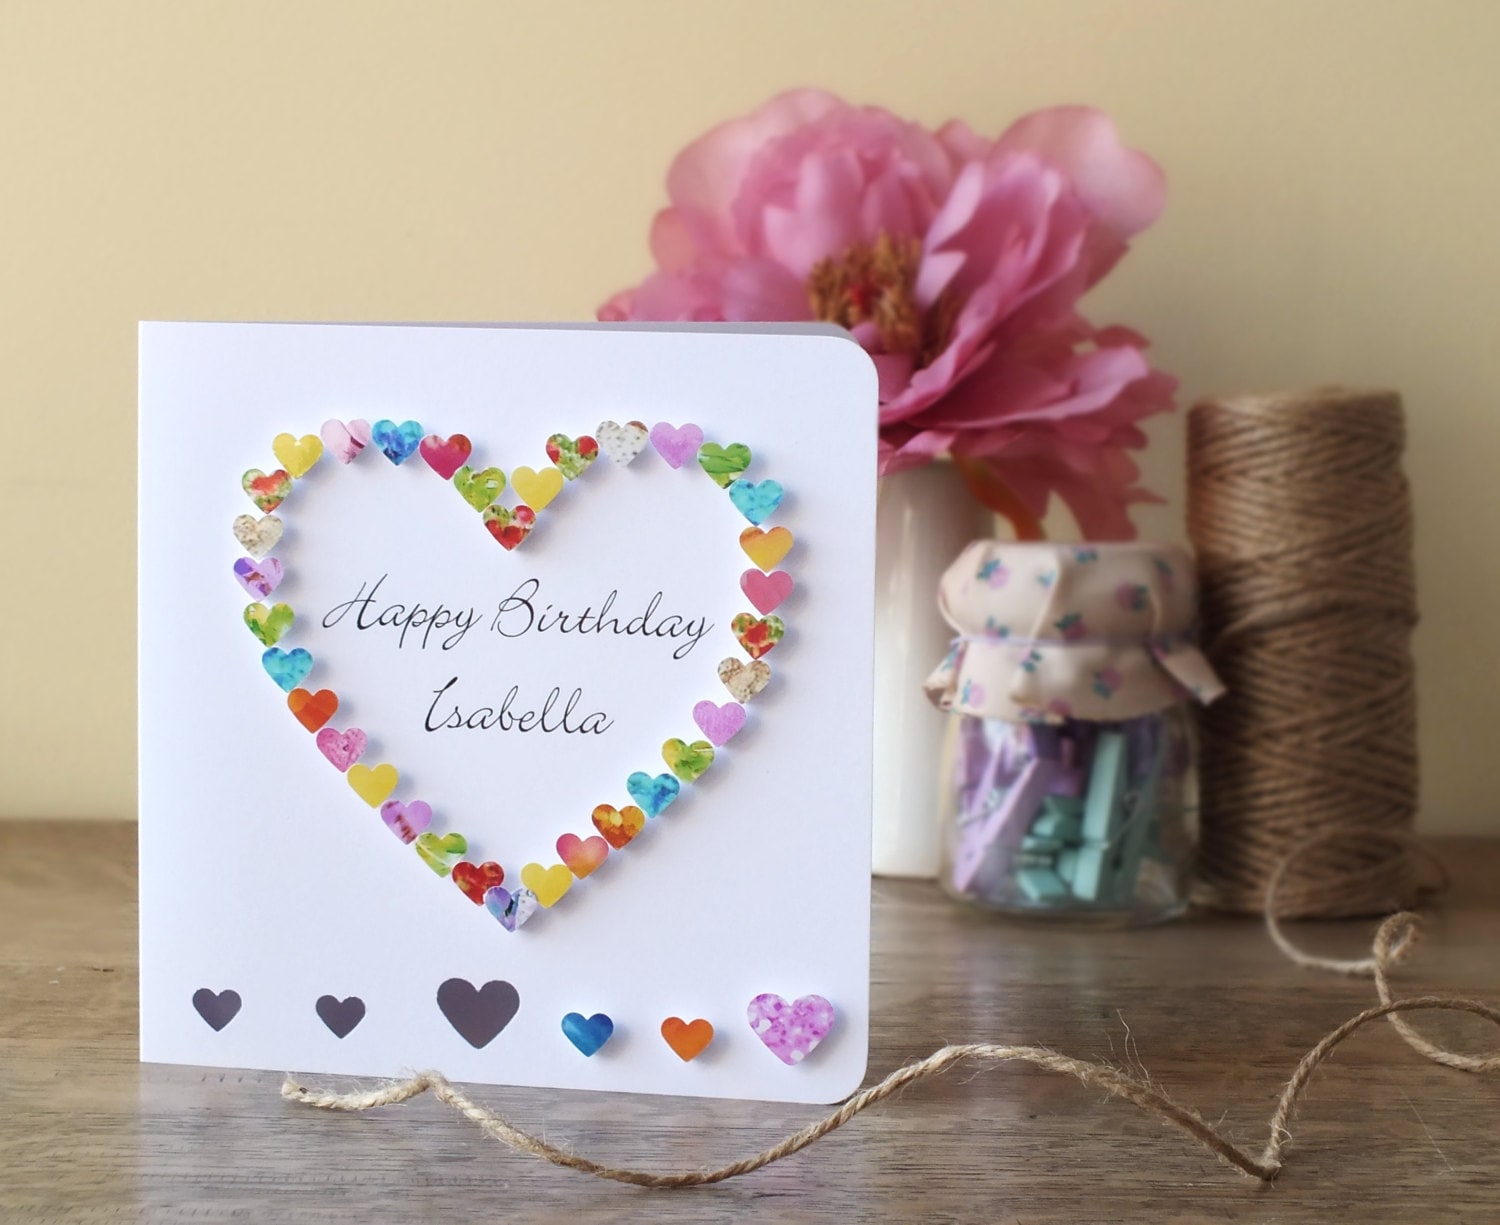 Special personalised birthday cards